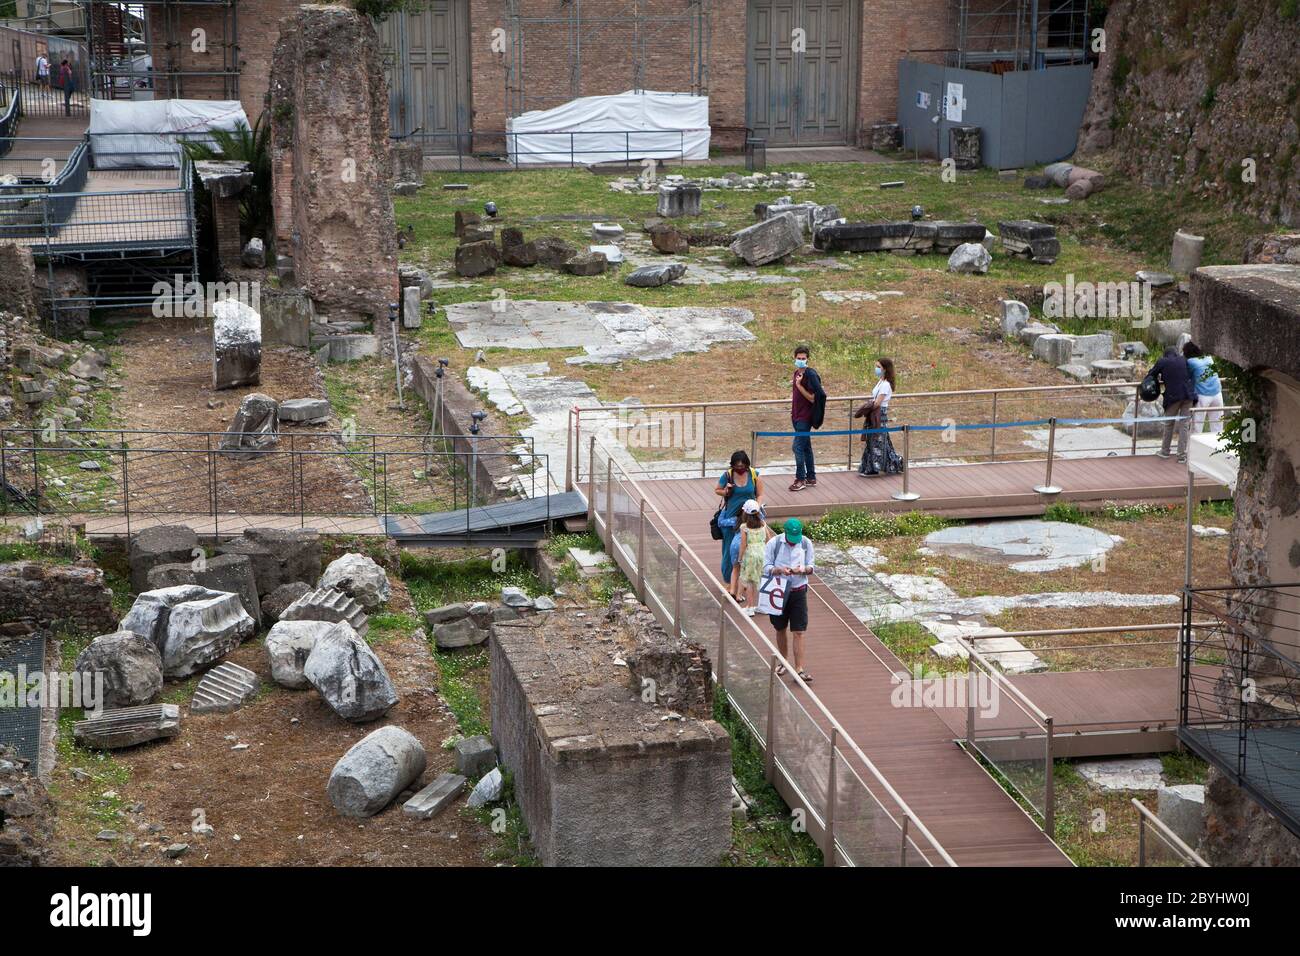 Still few tourists in Rome after Covid19 lockdown. People wearing a protective face mask visits Fori Imperiali Area in Rome, Italy, on Tuesday, June 02, 2020. Stock Photo